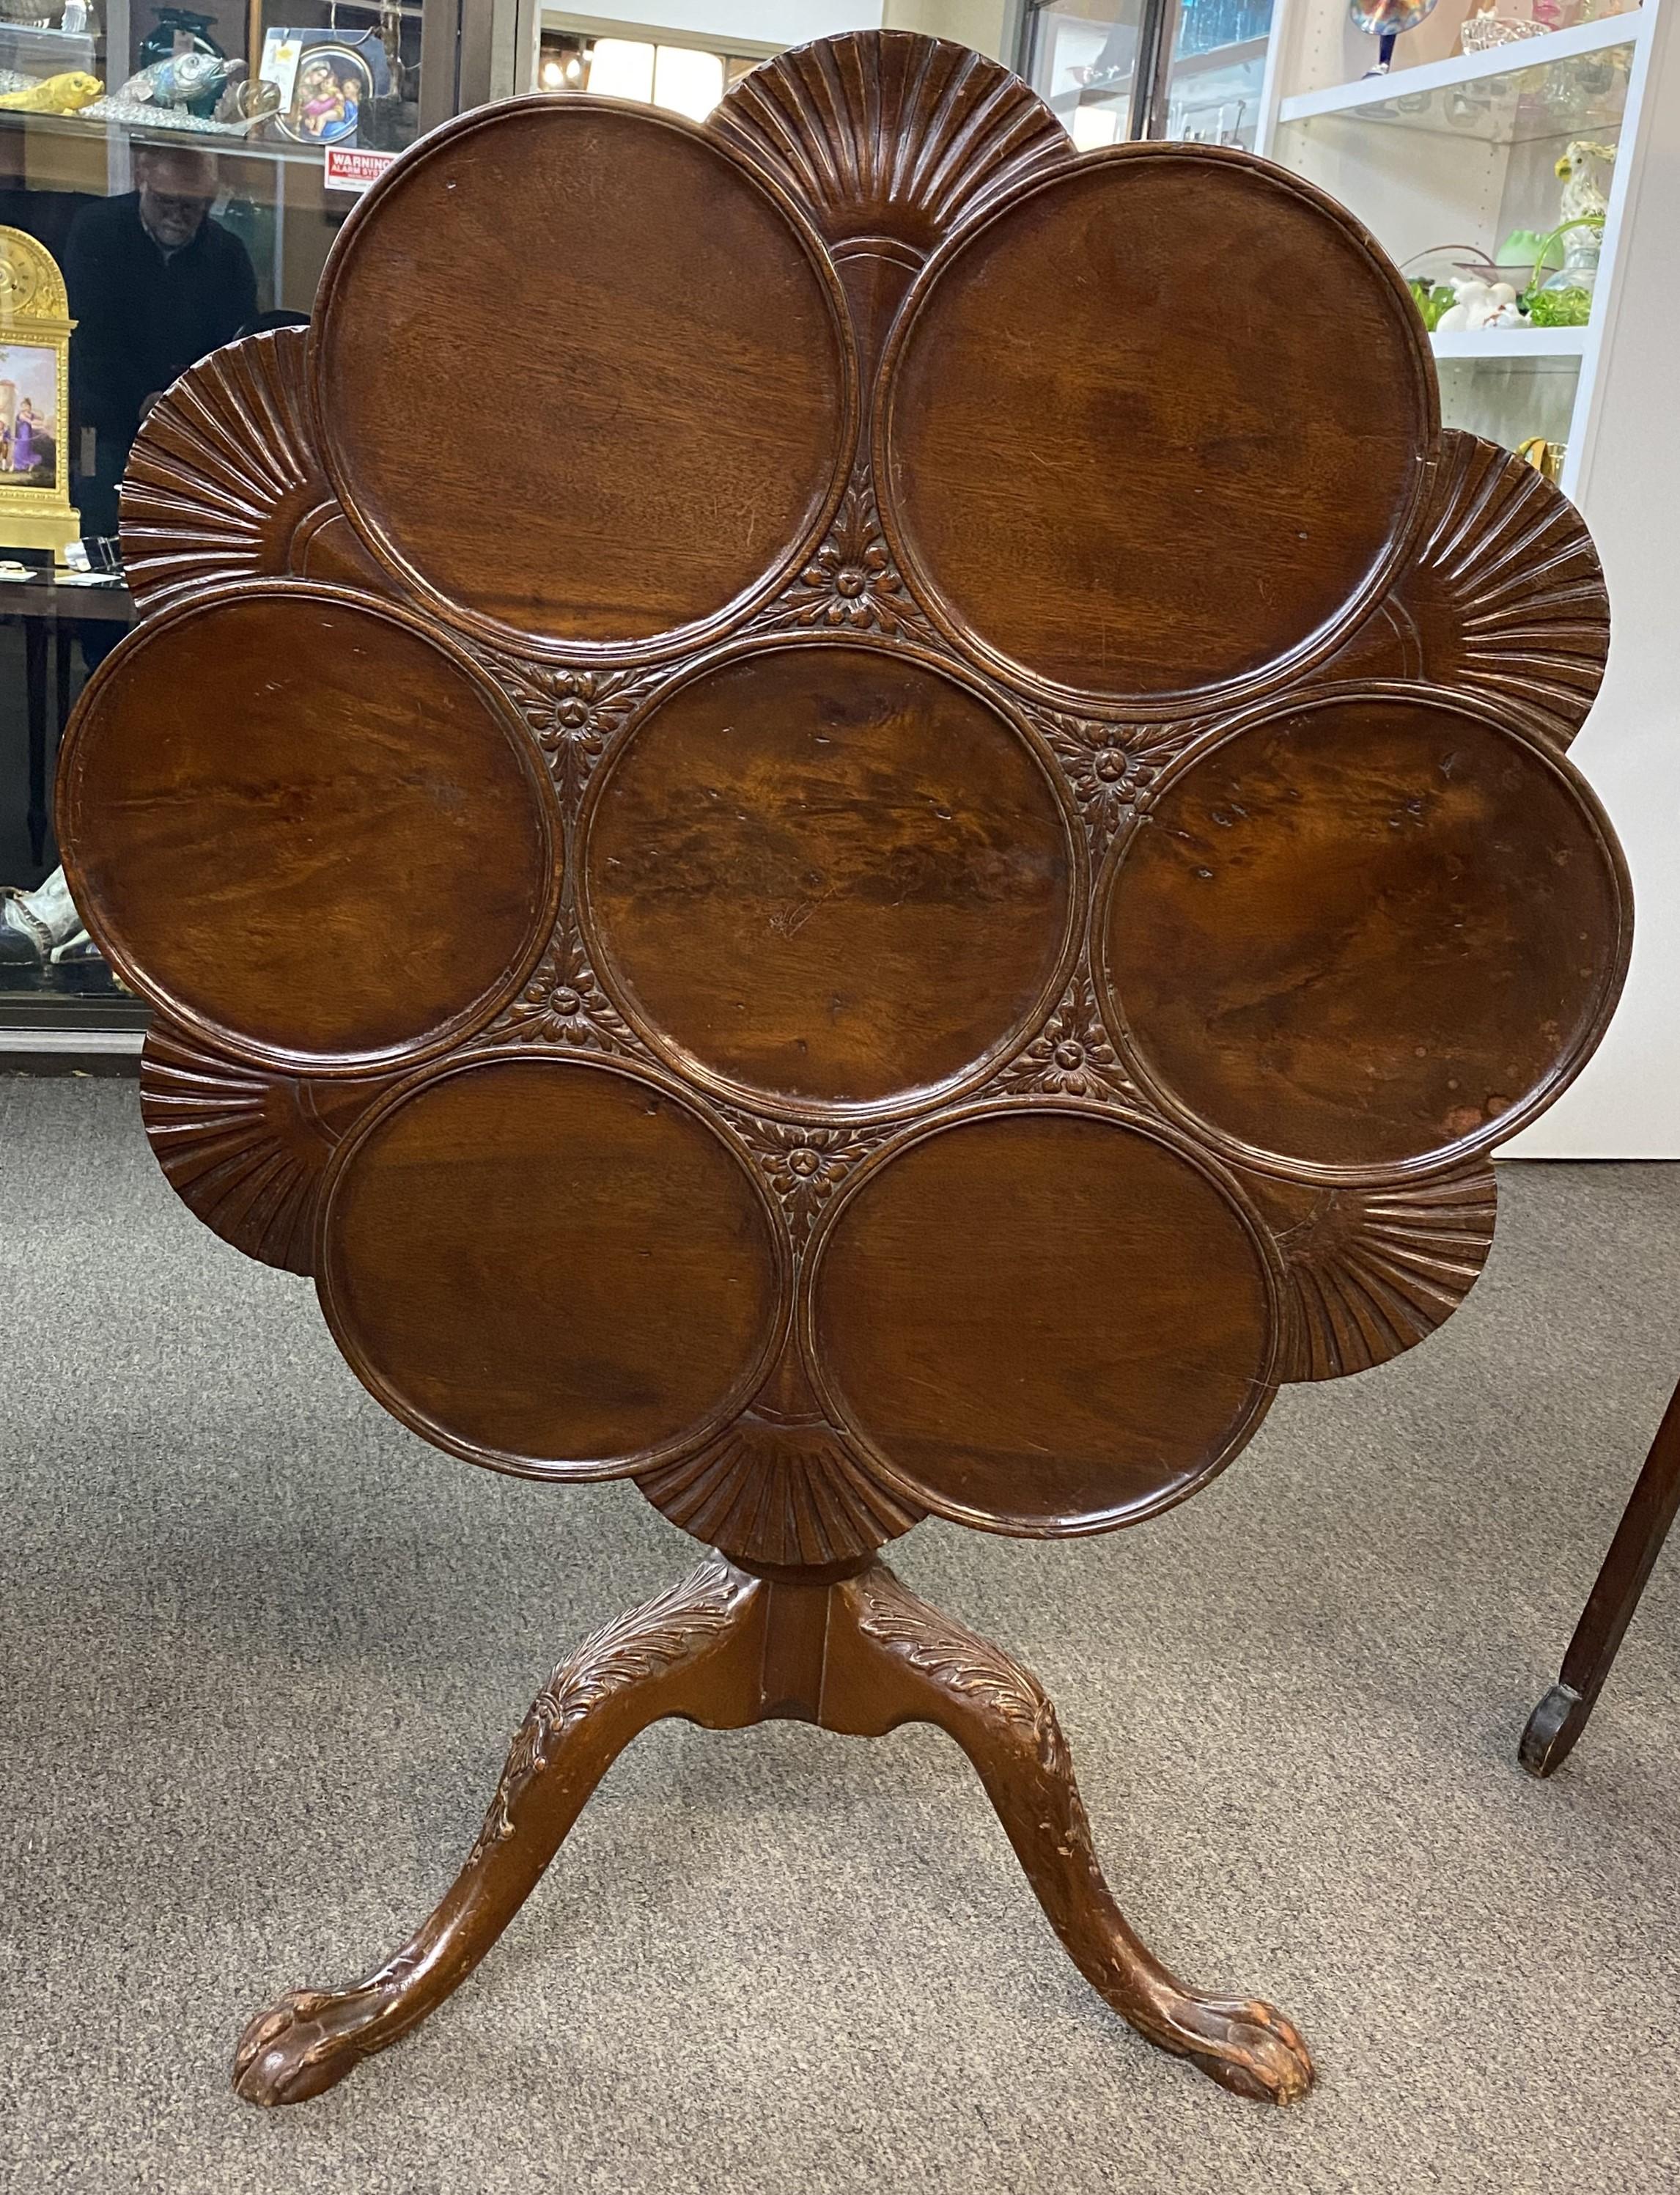 A wonderful English George III mahogany tilt top supper table circa 1785 with shell carvings on a foliate carved pedestal and tripod legs, terminating with ball & claw feet. Very good overall condition, with some minor repairs, restorations, surface